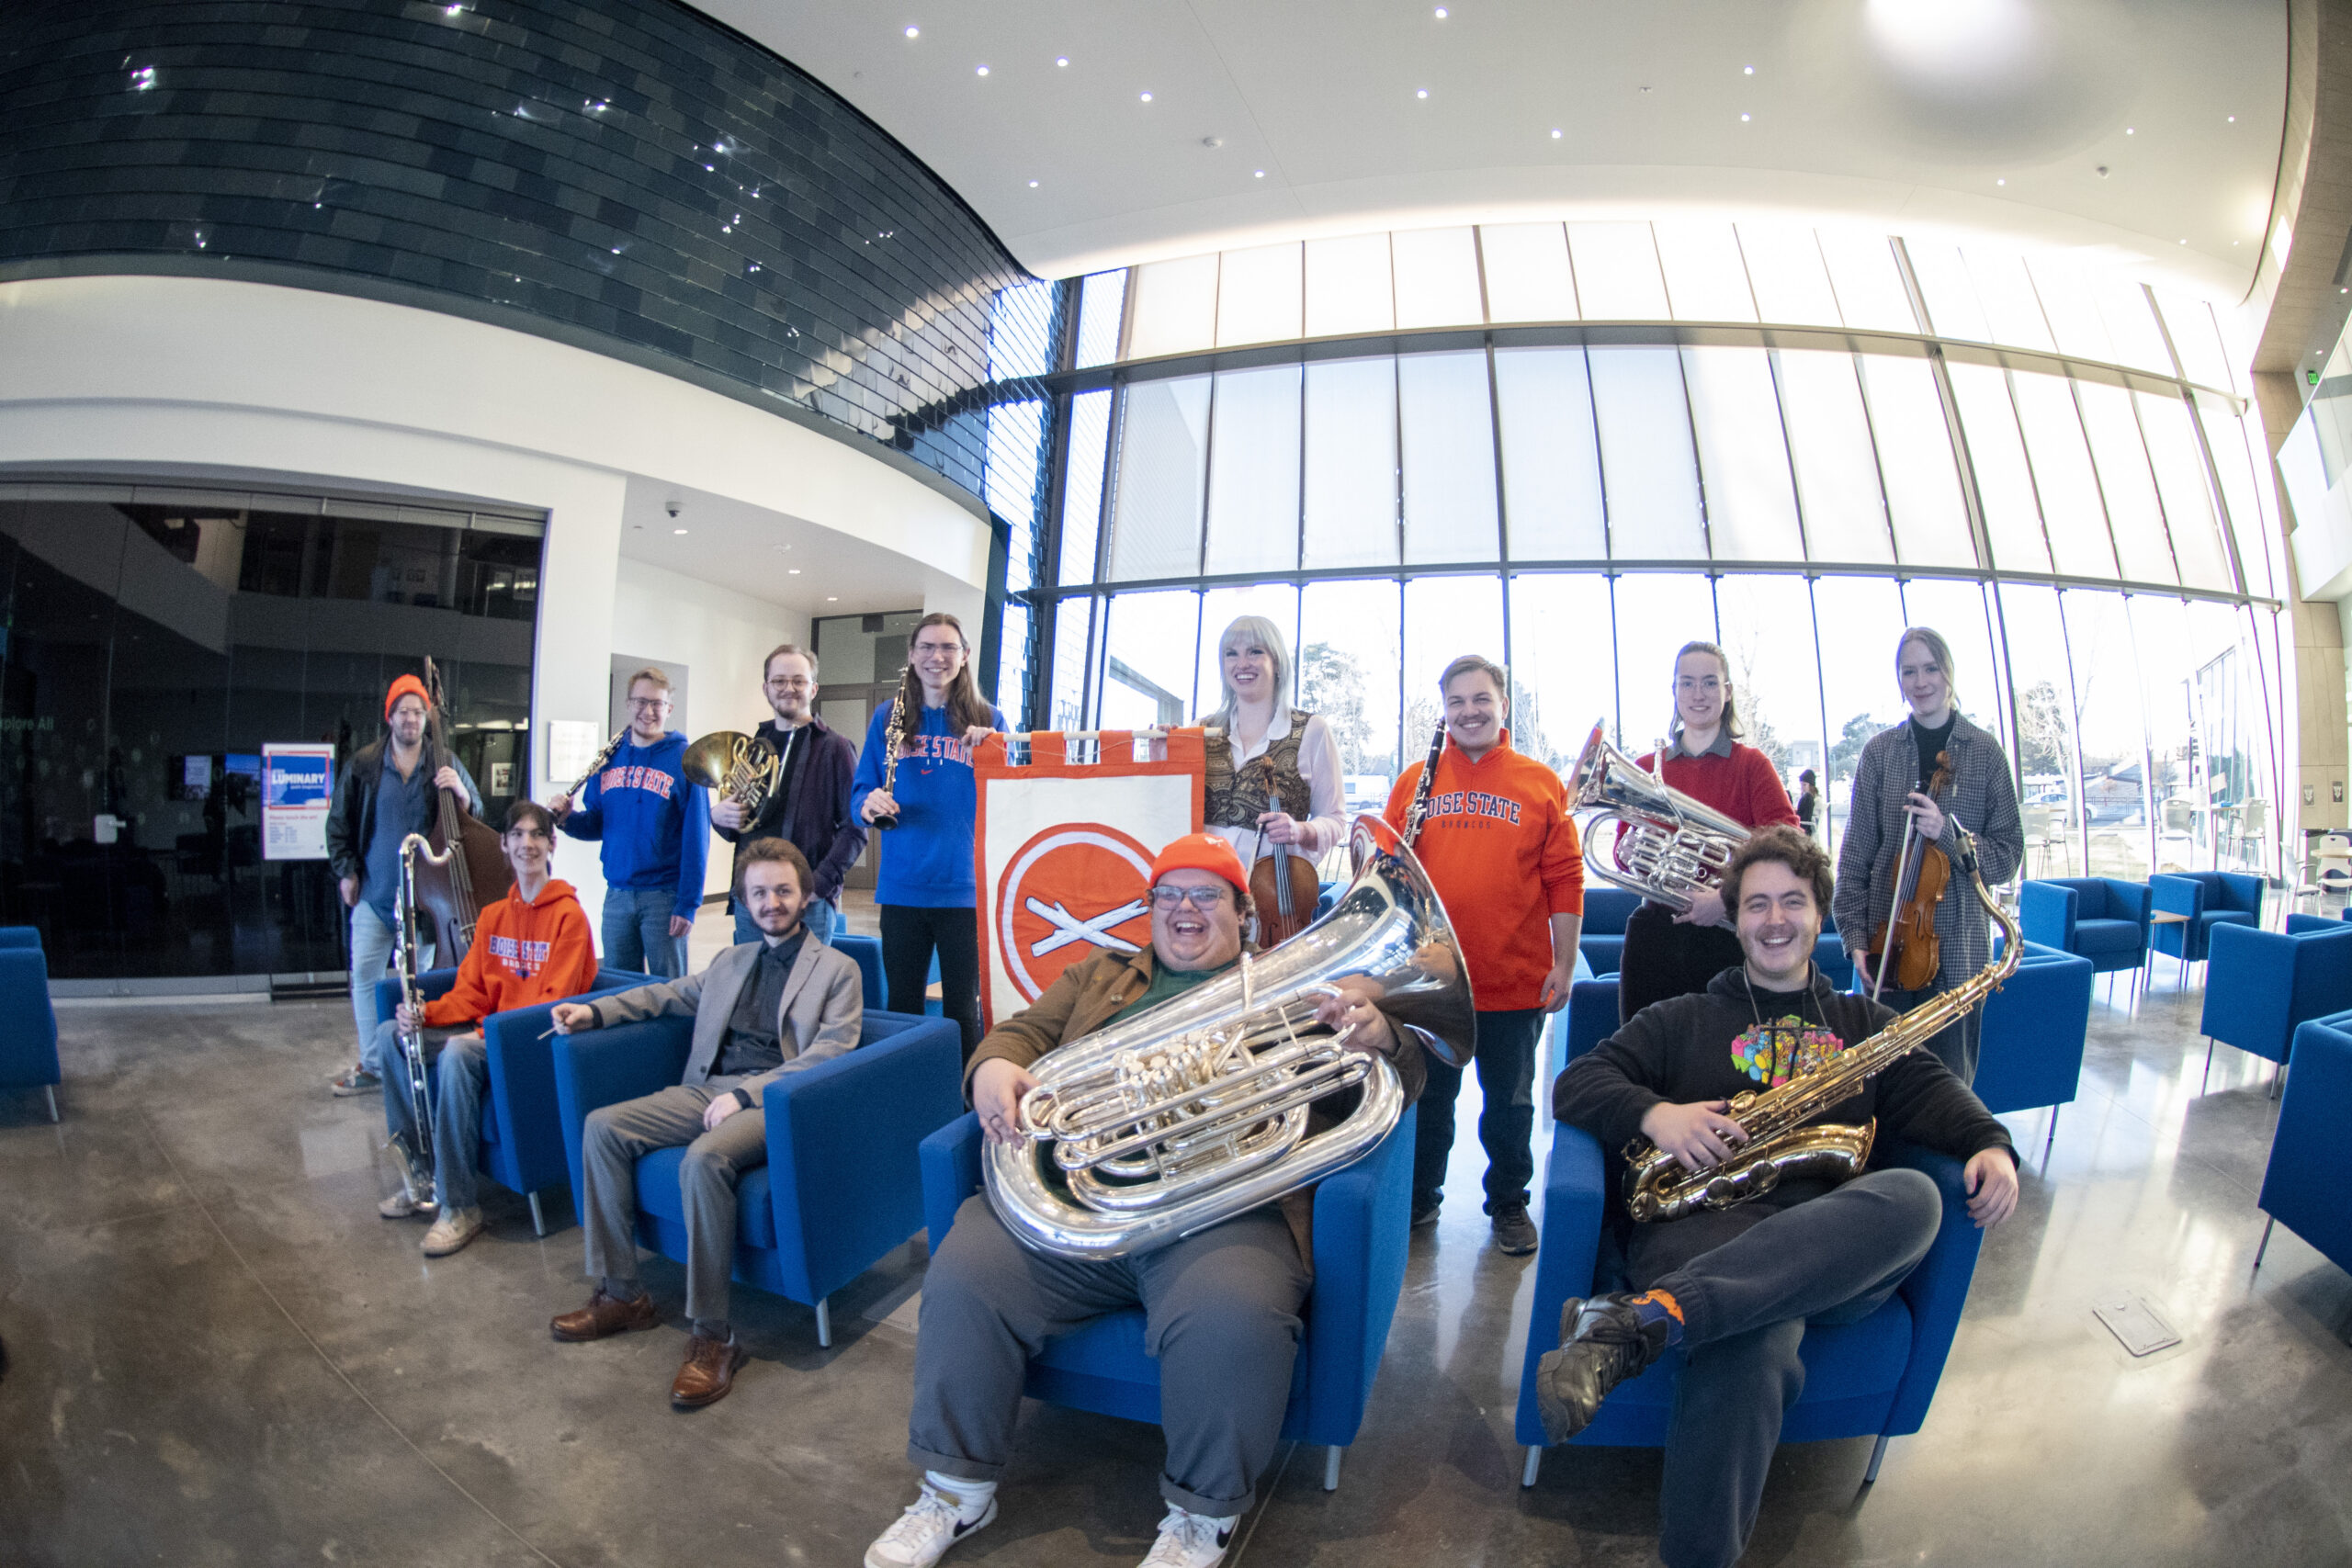 A group of musicians pose in the Center for the Visual Arts